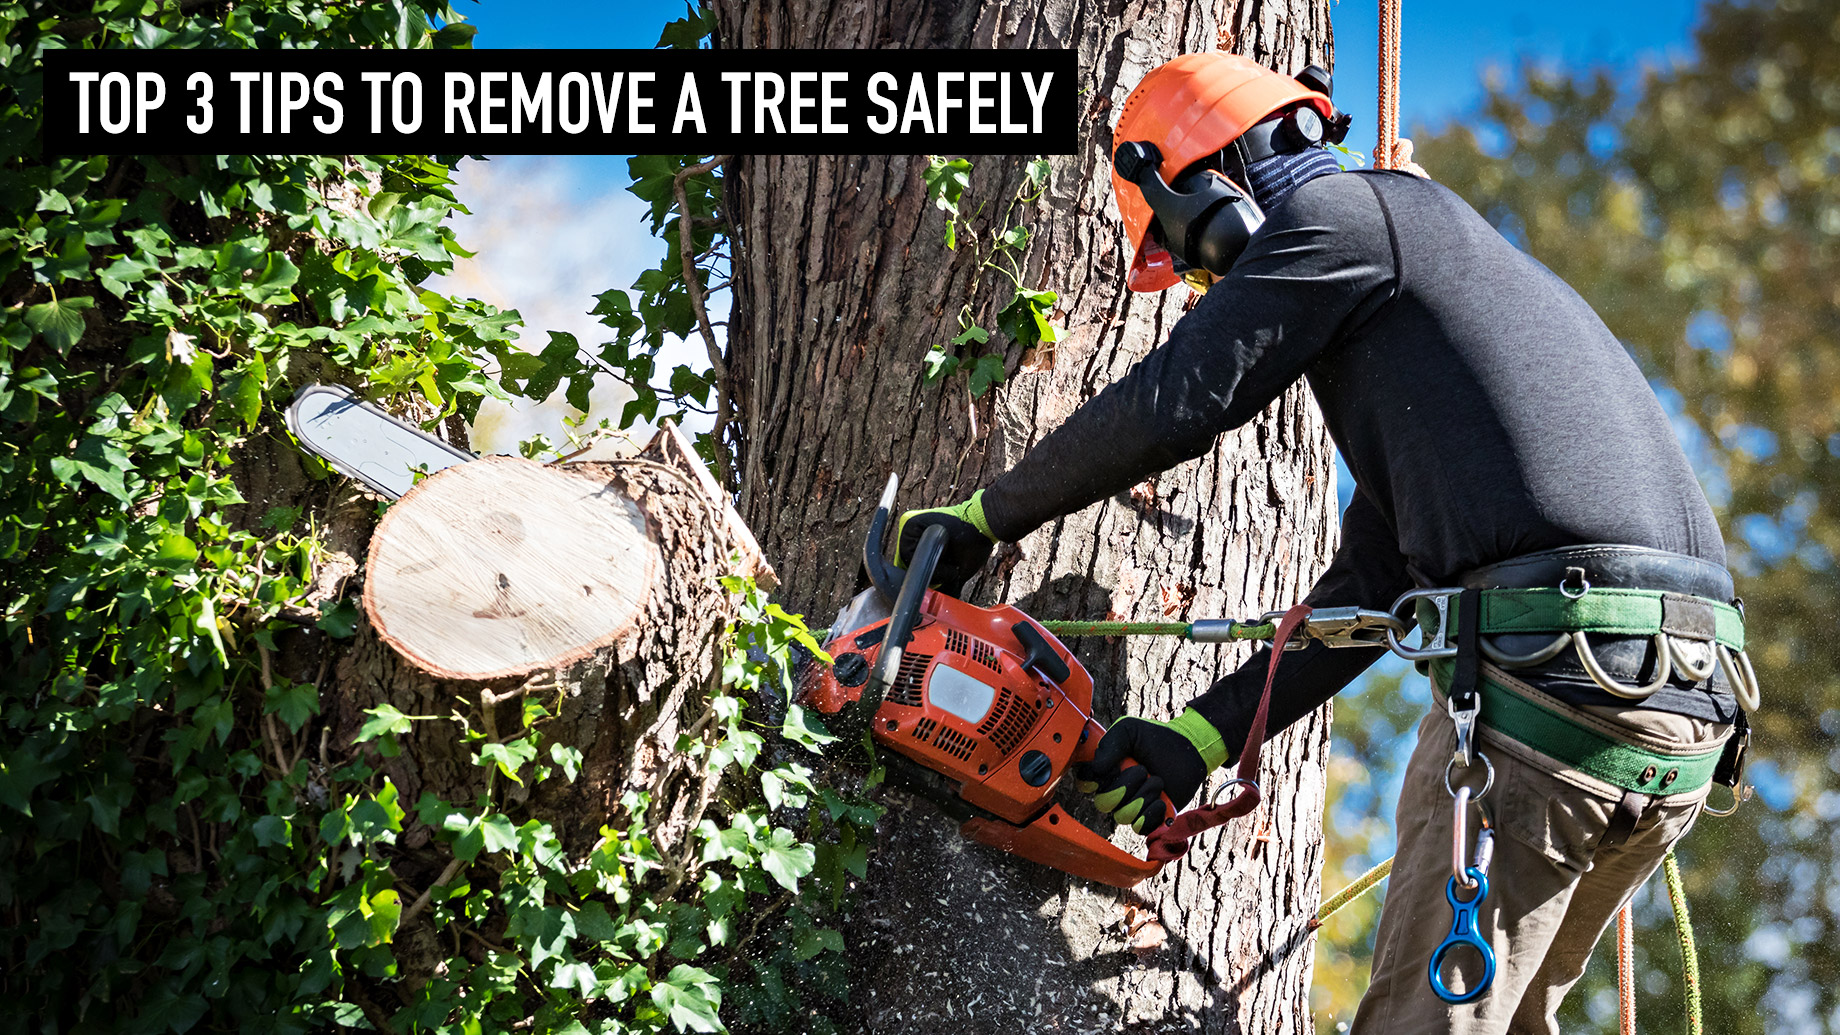 Top 3 Tips To Remove A Tree Safely